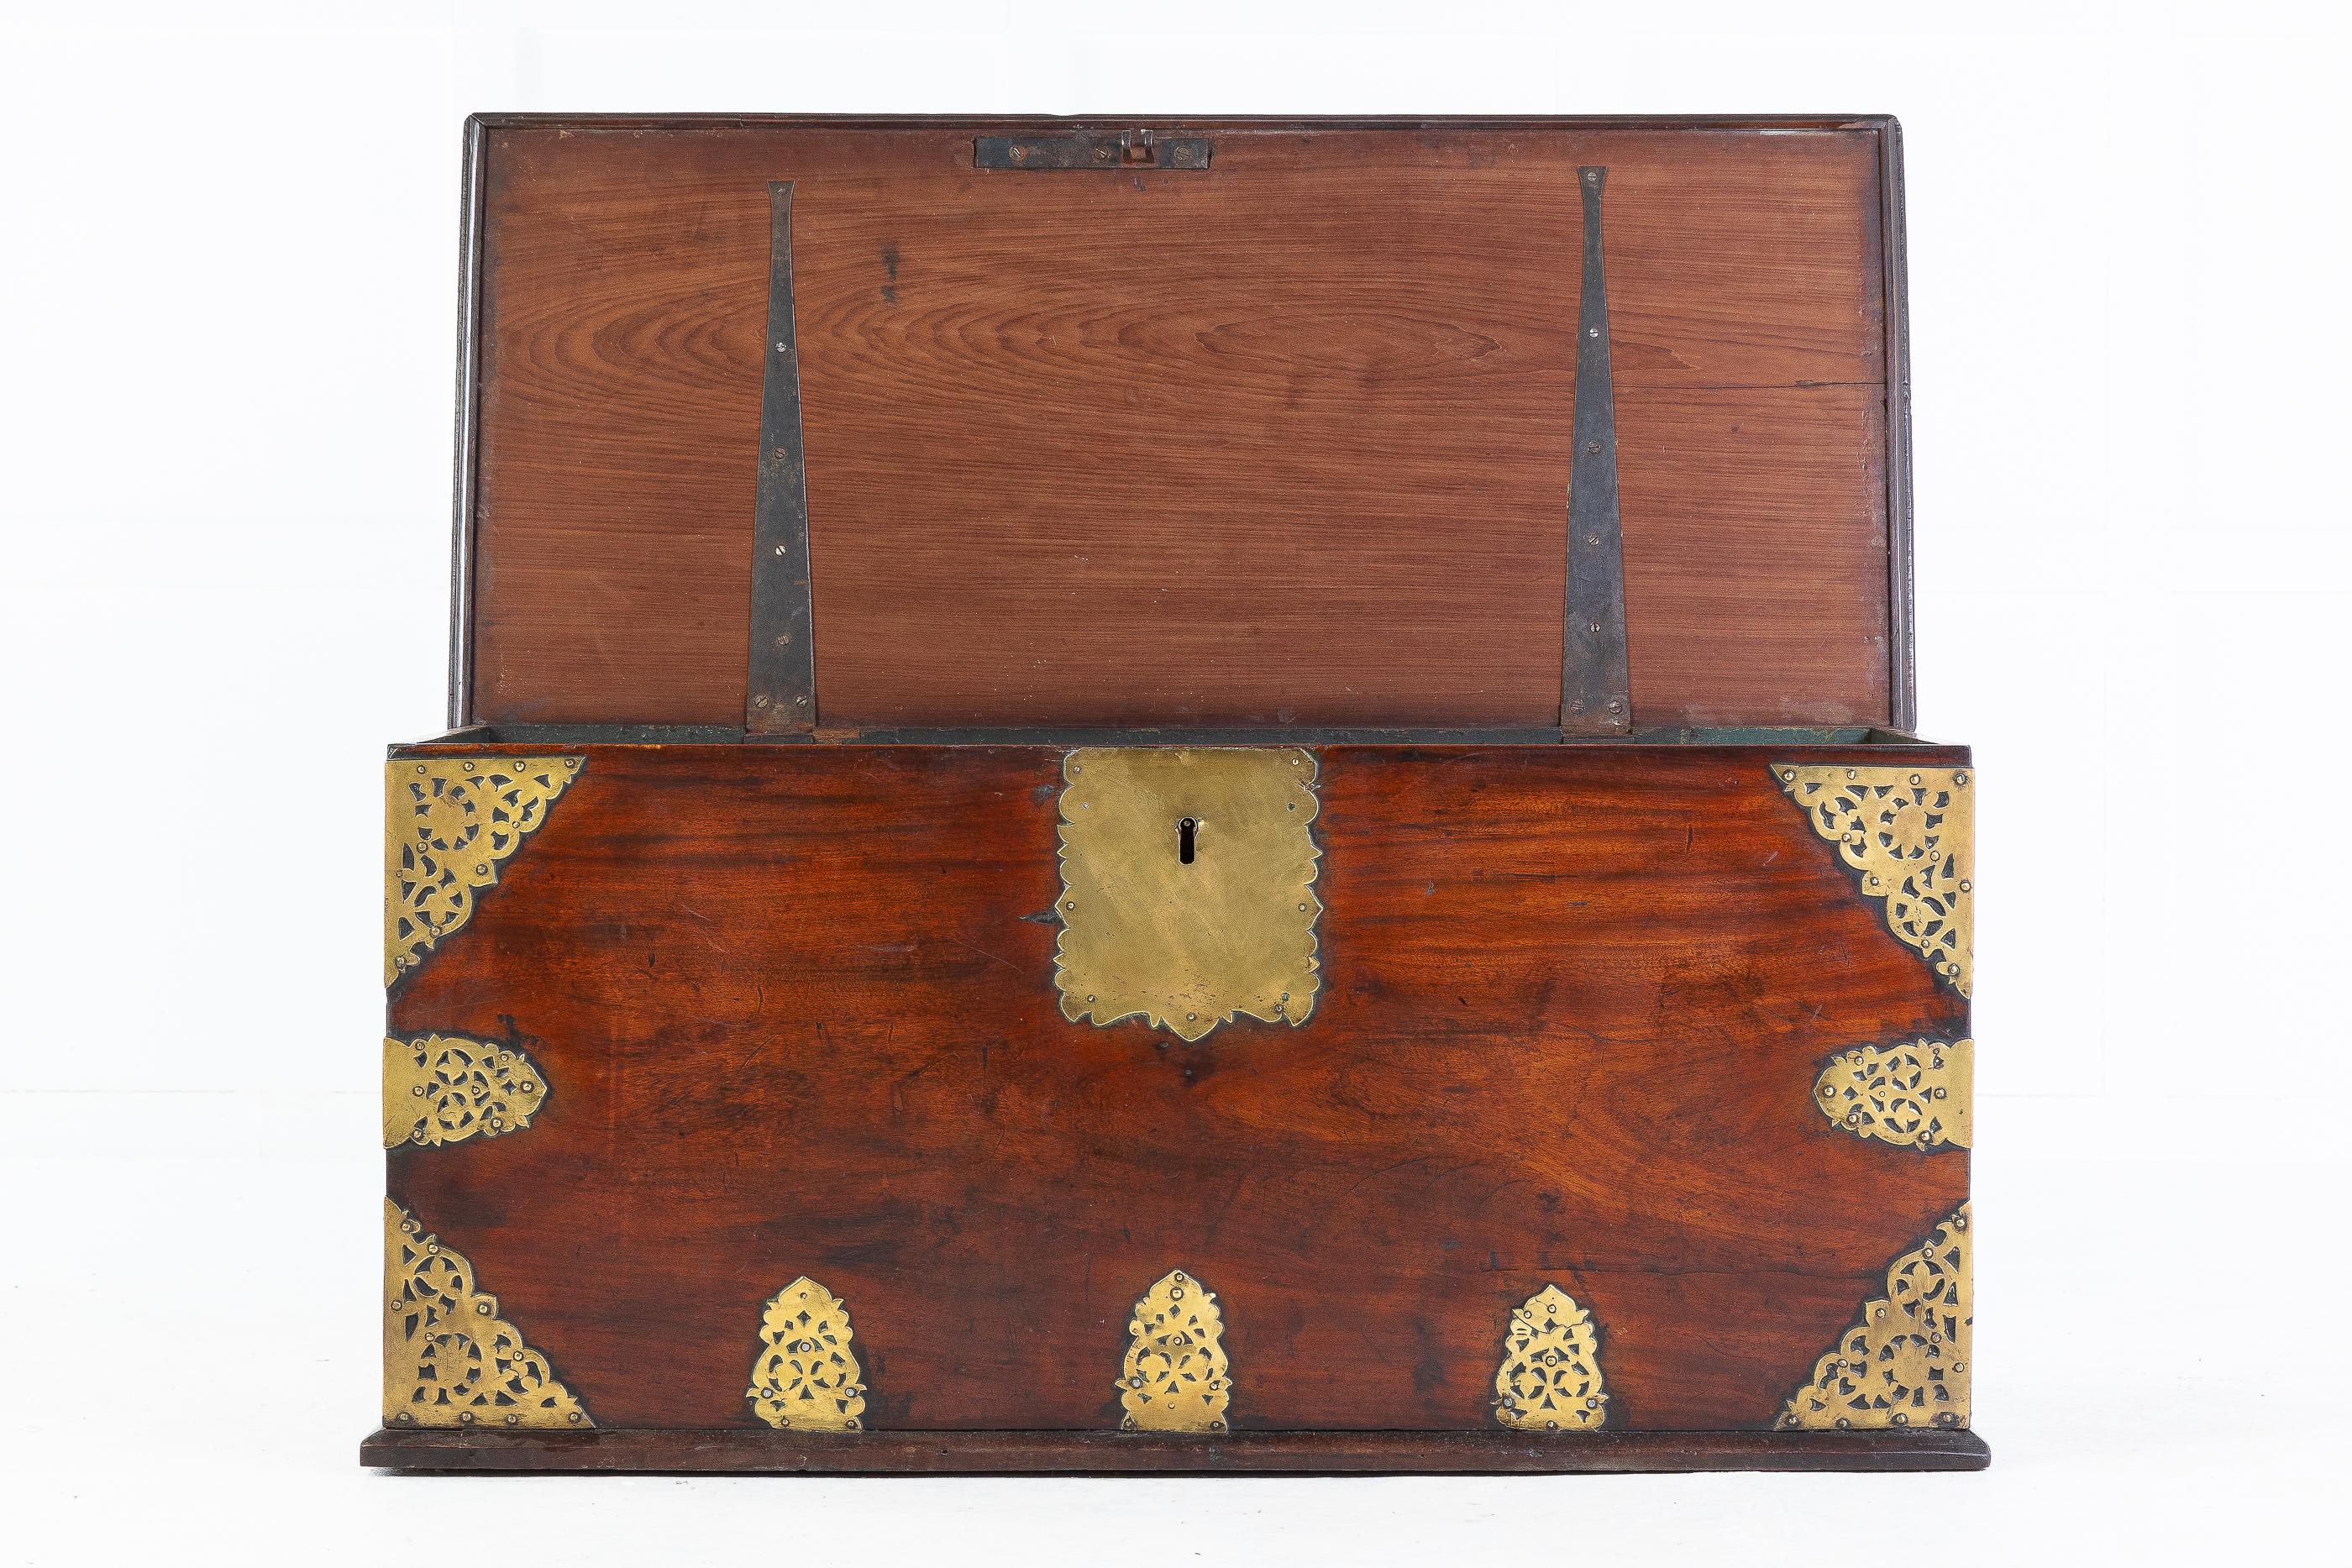 The top, sides and front decorated with pierced foliate mounts, super color and patina. The large single plank top has wonderful grain and a moulded edge. There are beautiful pierced brass mounts to the corners and lock plate.

The chest is